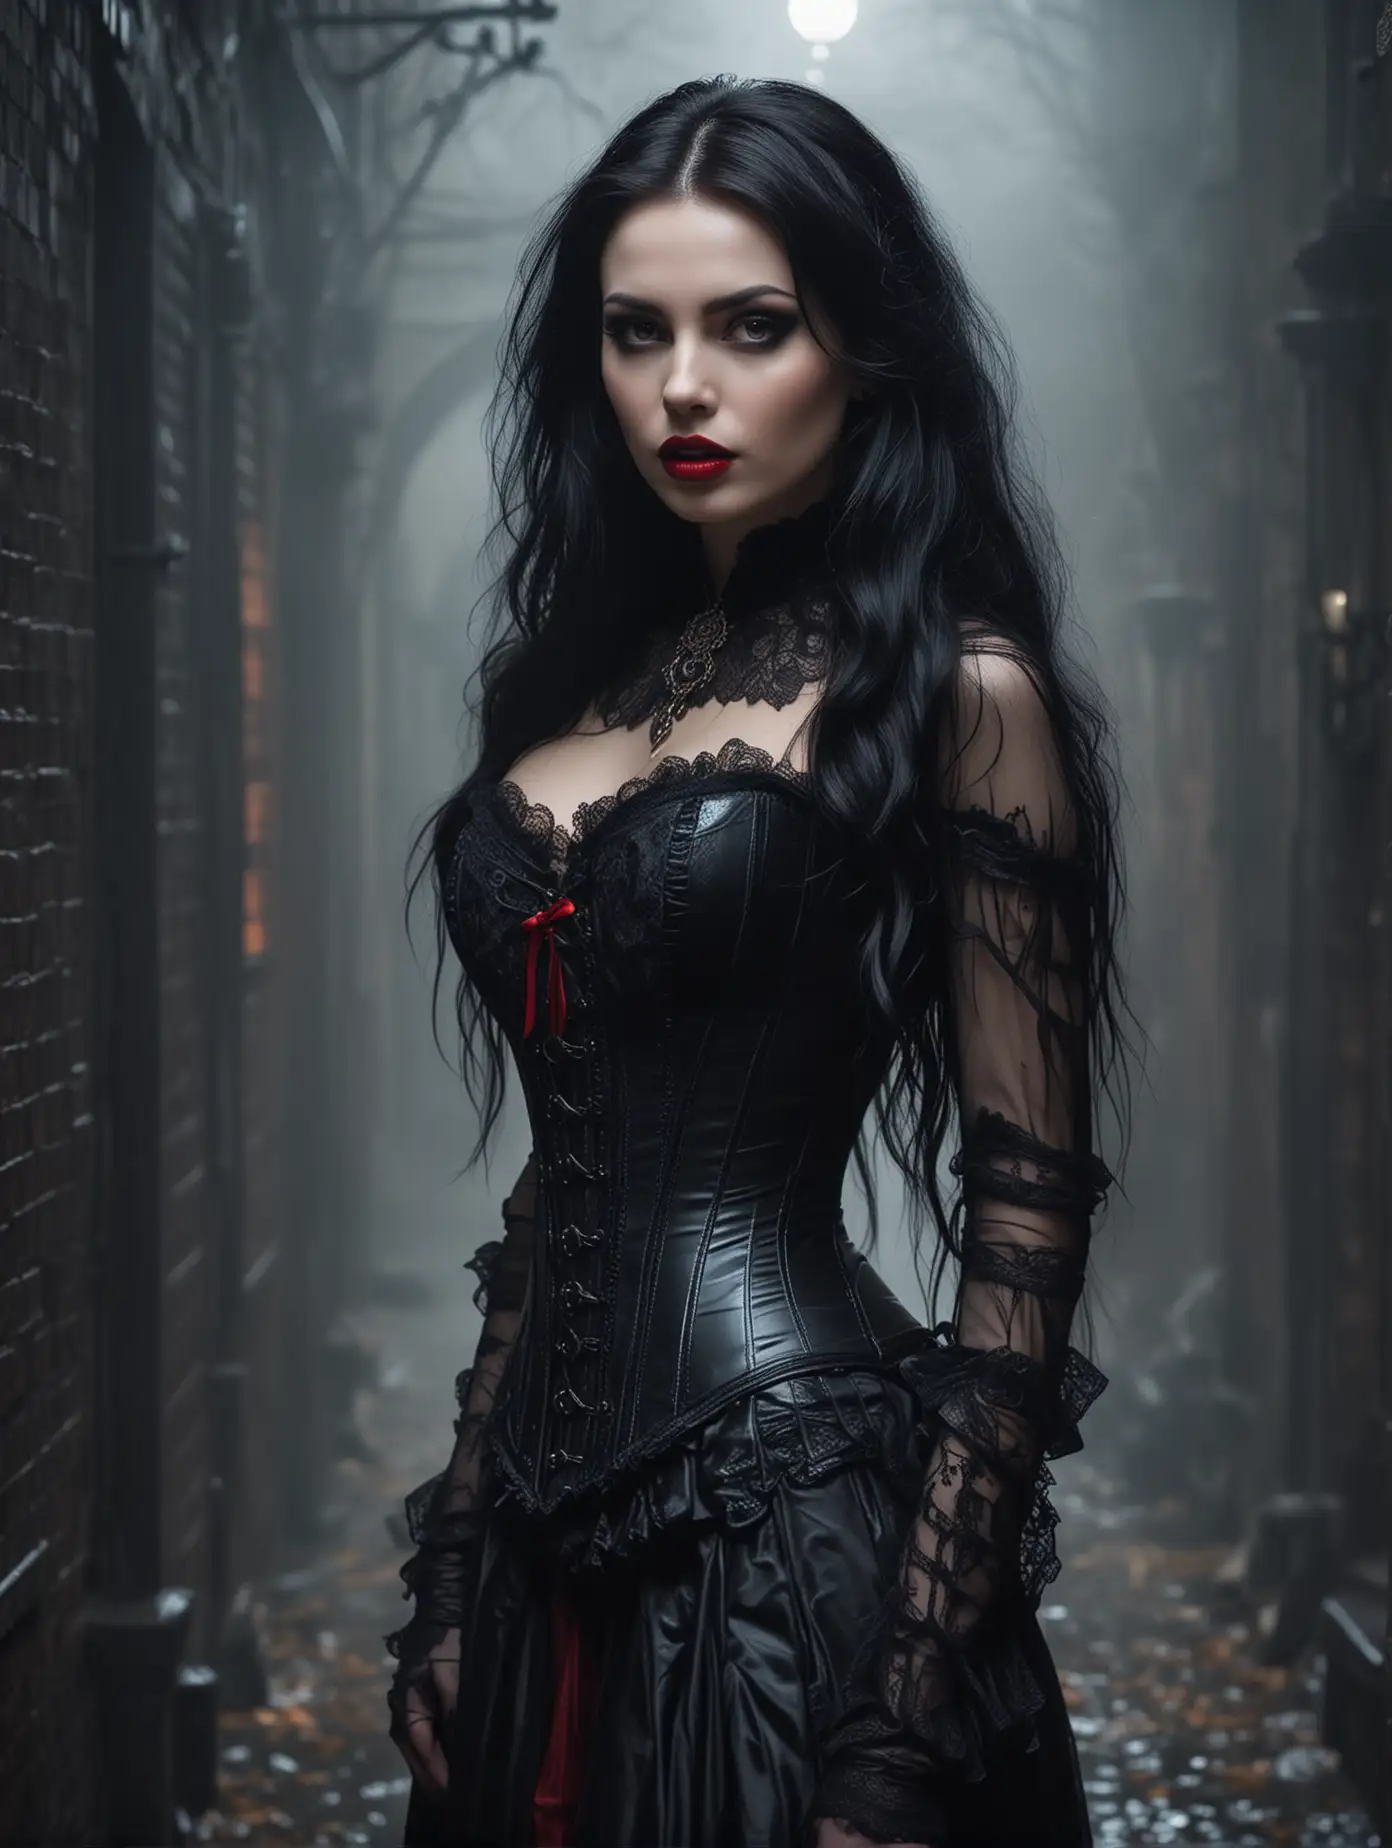 Ethereal Gothic Vampire Woman in Latex Corset and Red Lipstick